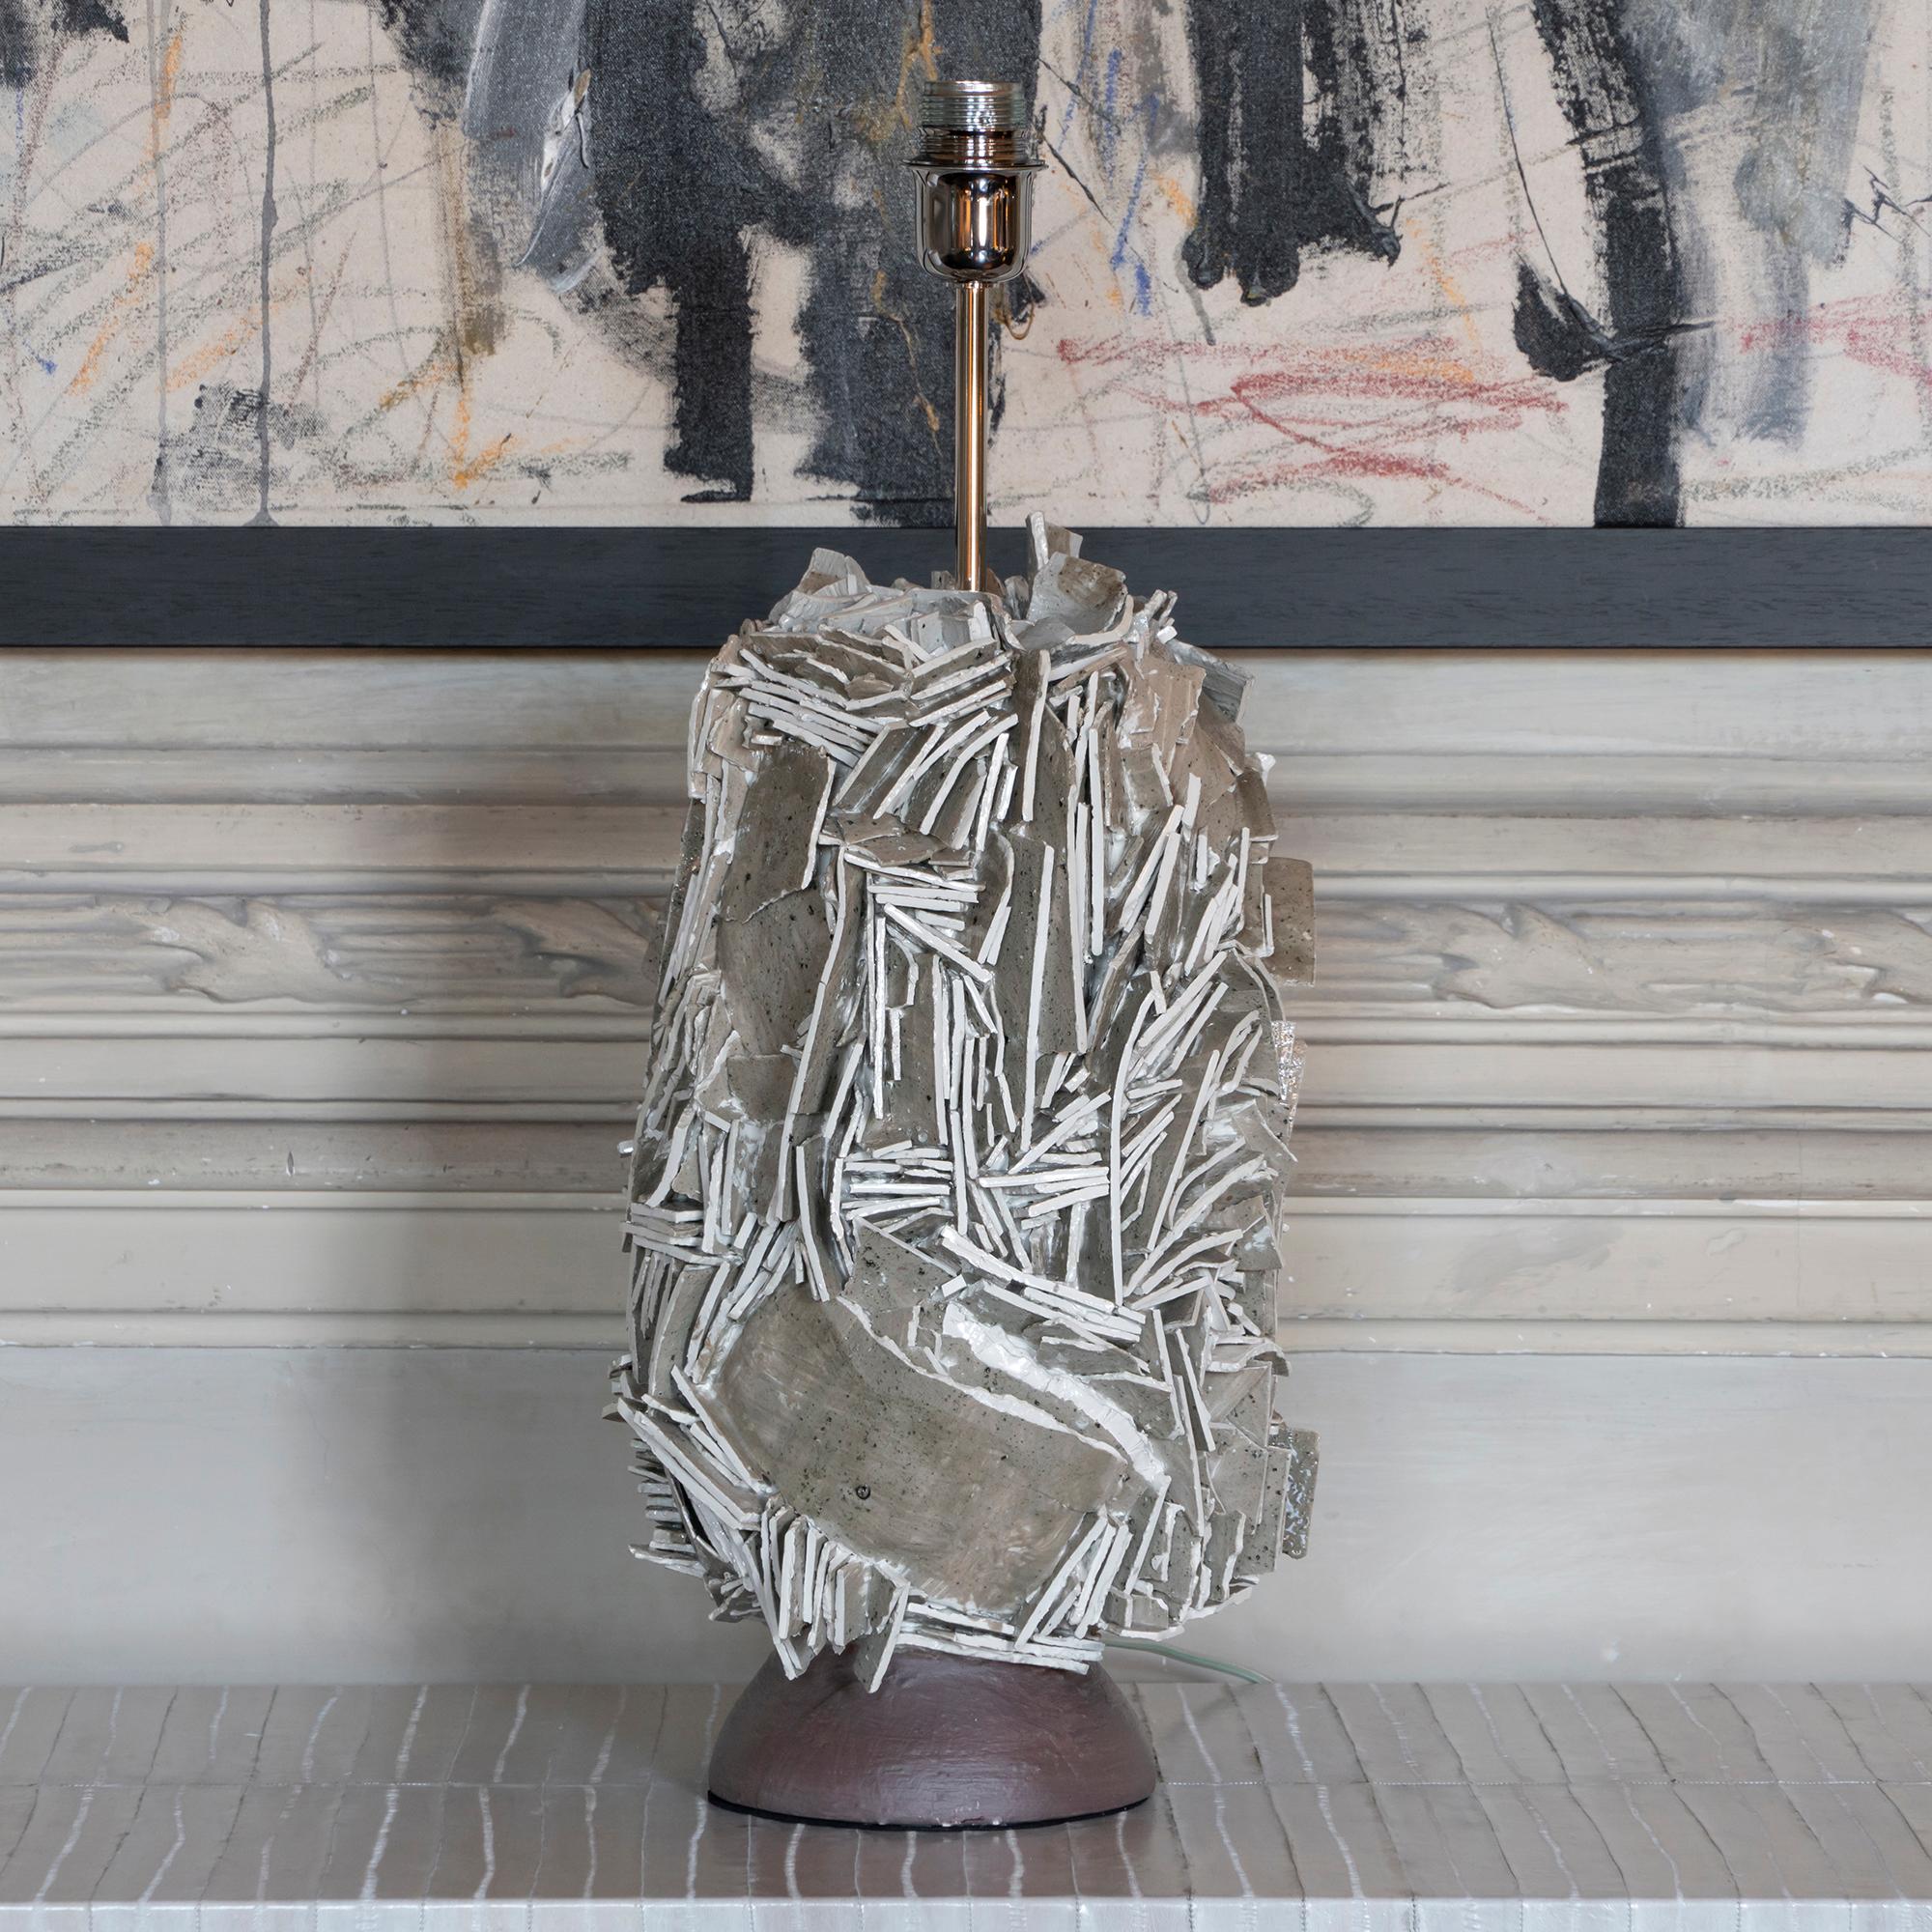 One of a kind artistic table lamp realized in taupe glazed and raw ceramic, lamp measure cm 20 x H. cm 64 plus ivory silk shantung lampshade measure cm 50 x H. cm 36, total high cm 91, natural brass details, Italy, 2020.